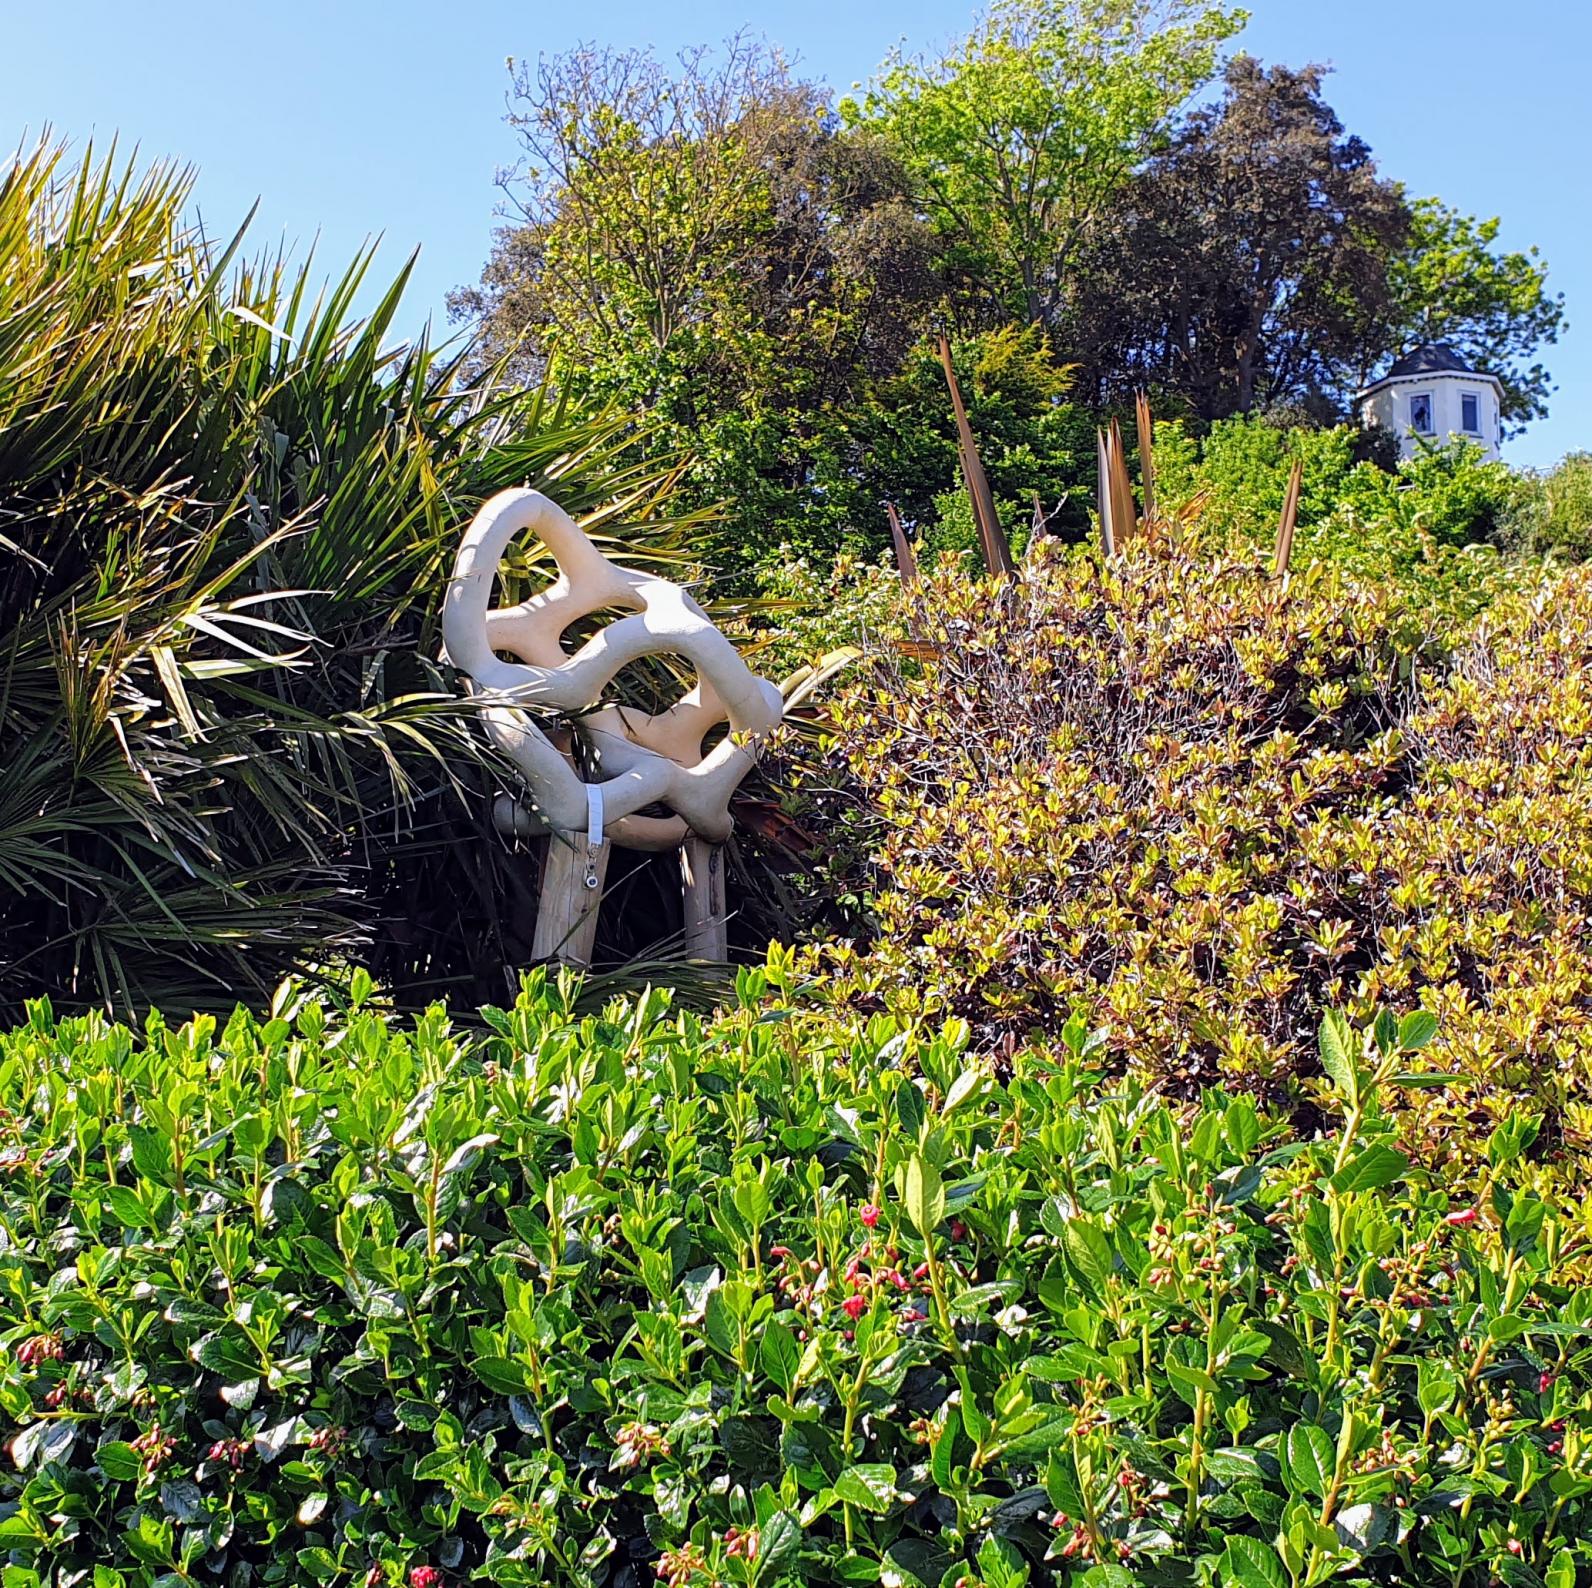 Open Form 1 by Isla Chaney, part of the Sculpture Trail in Langmoor Gardens, Lyme Regis